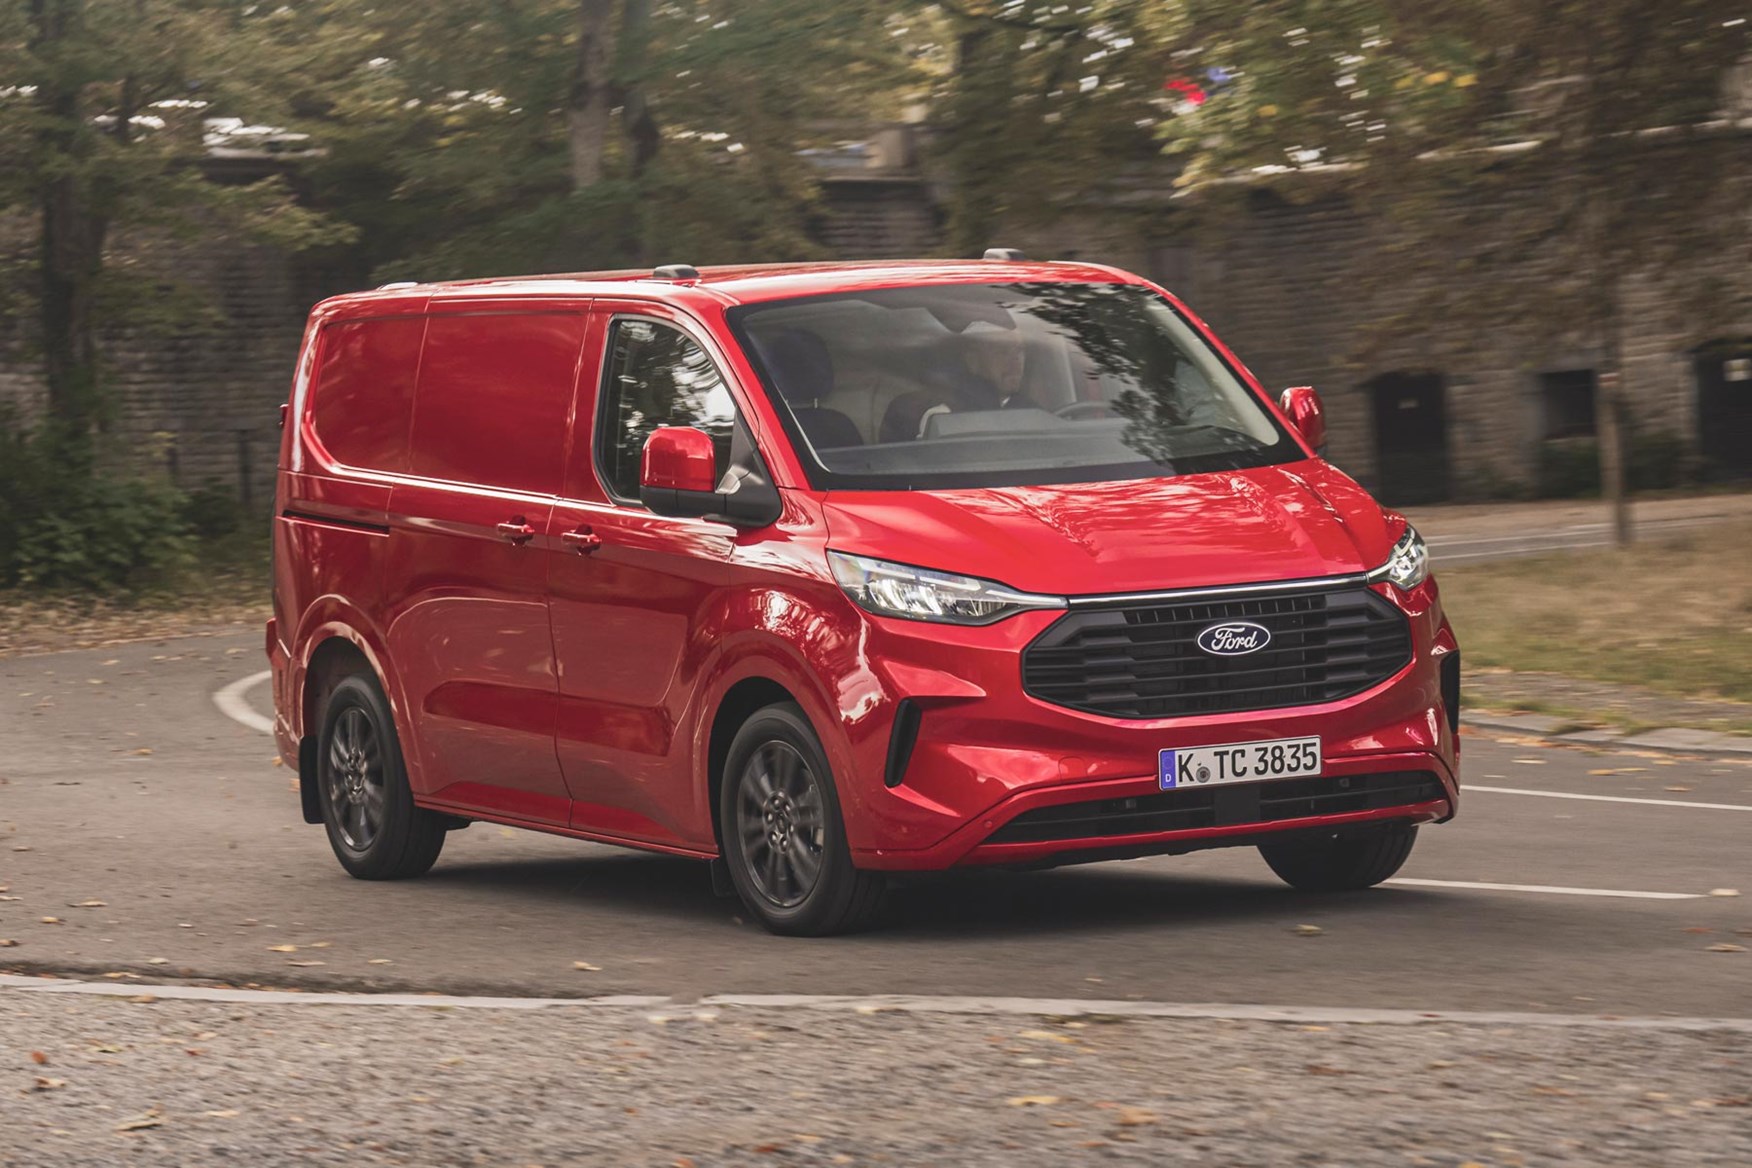 Ford Transit Custom - Top 7 best Features 2020